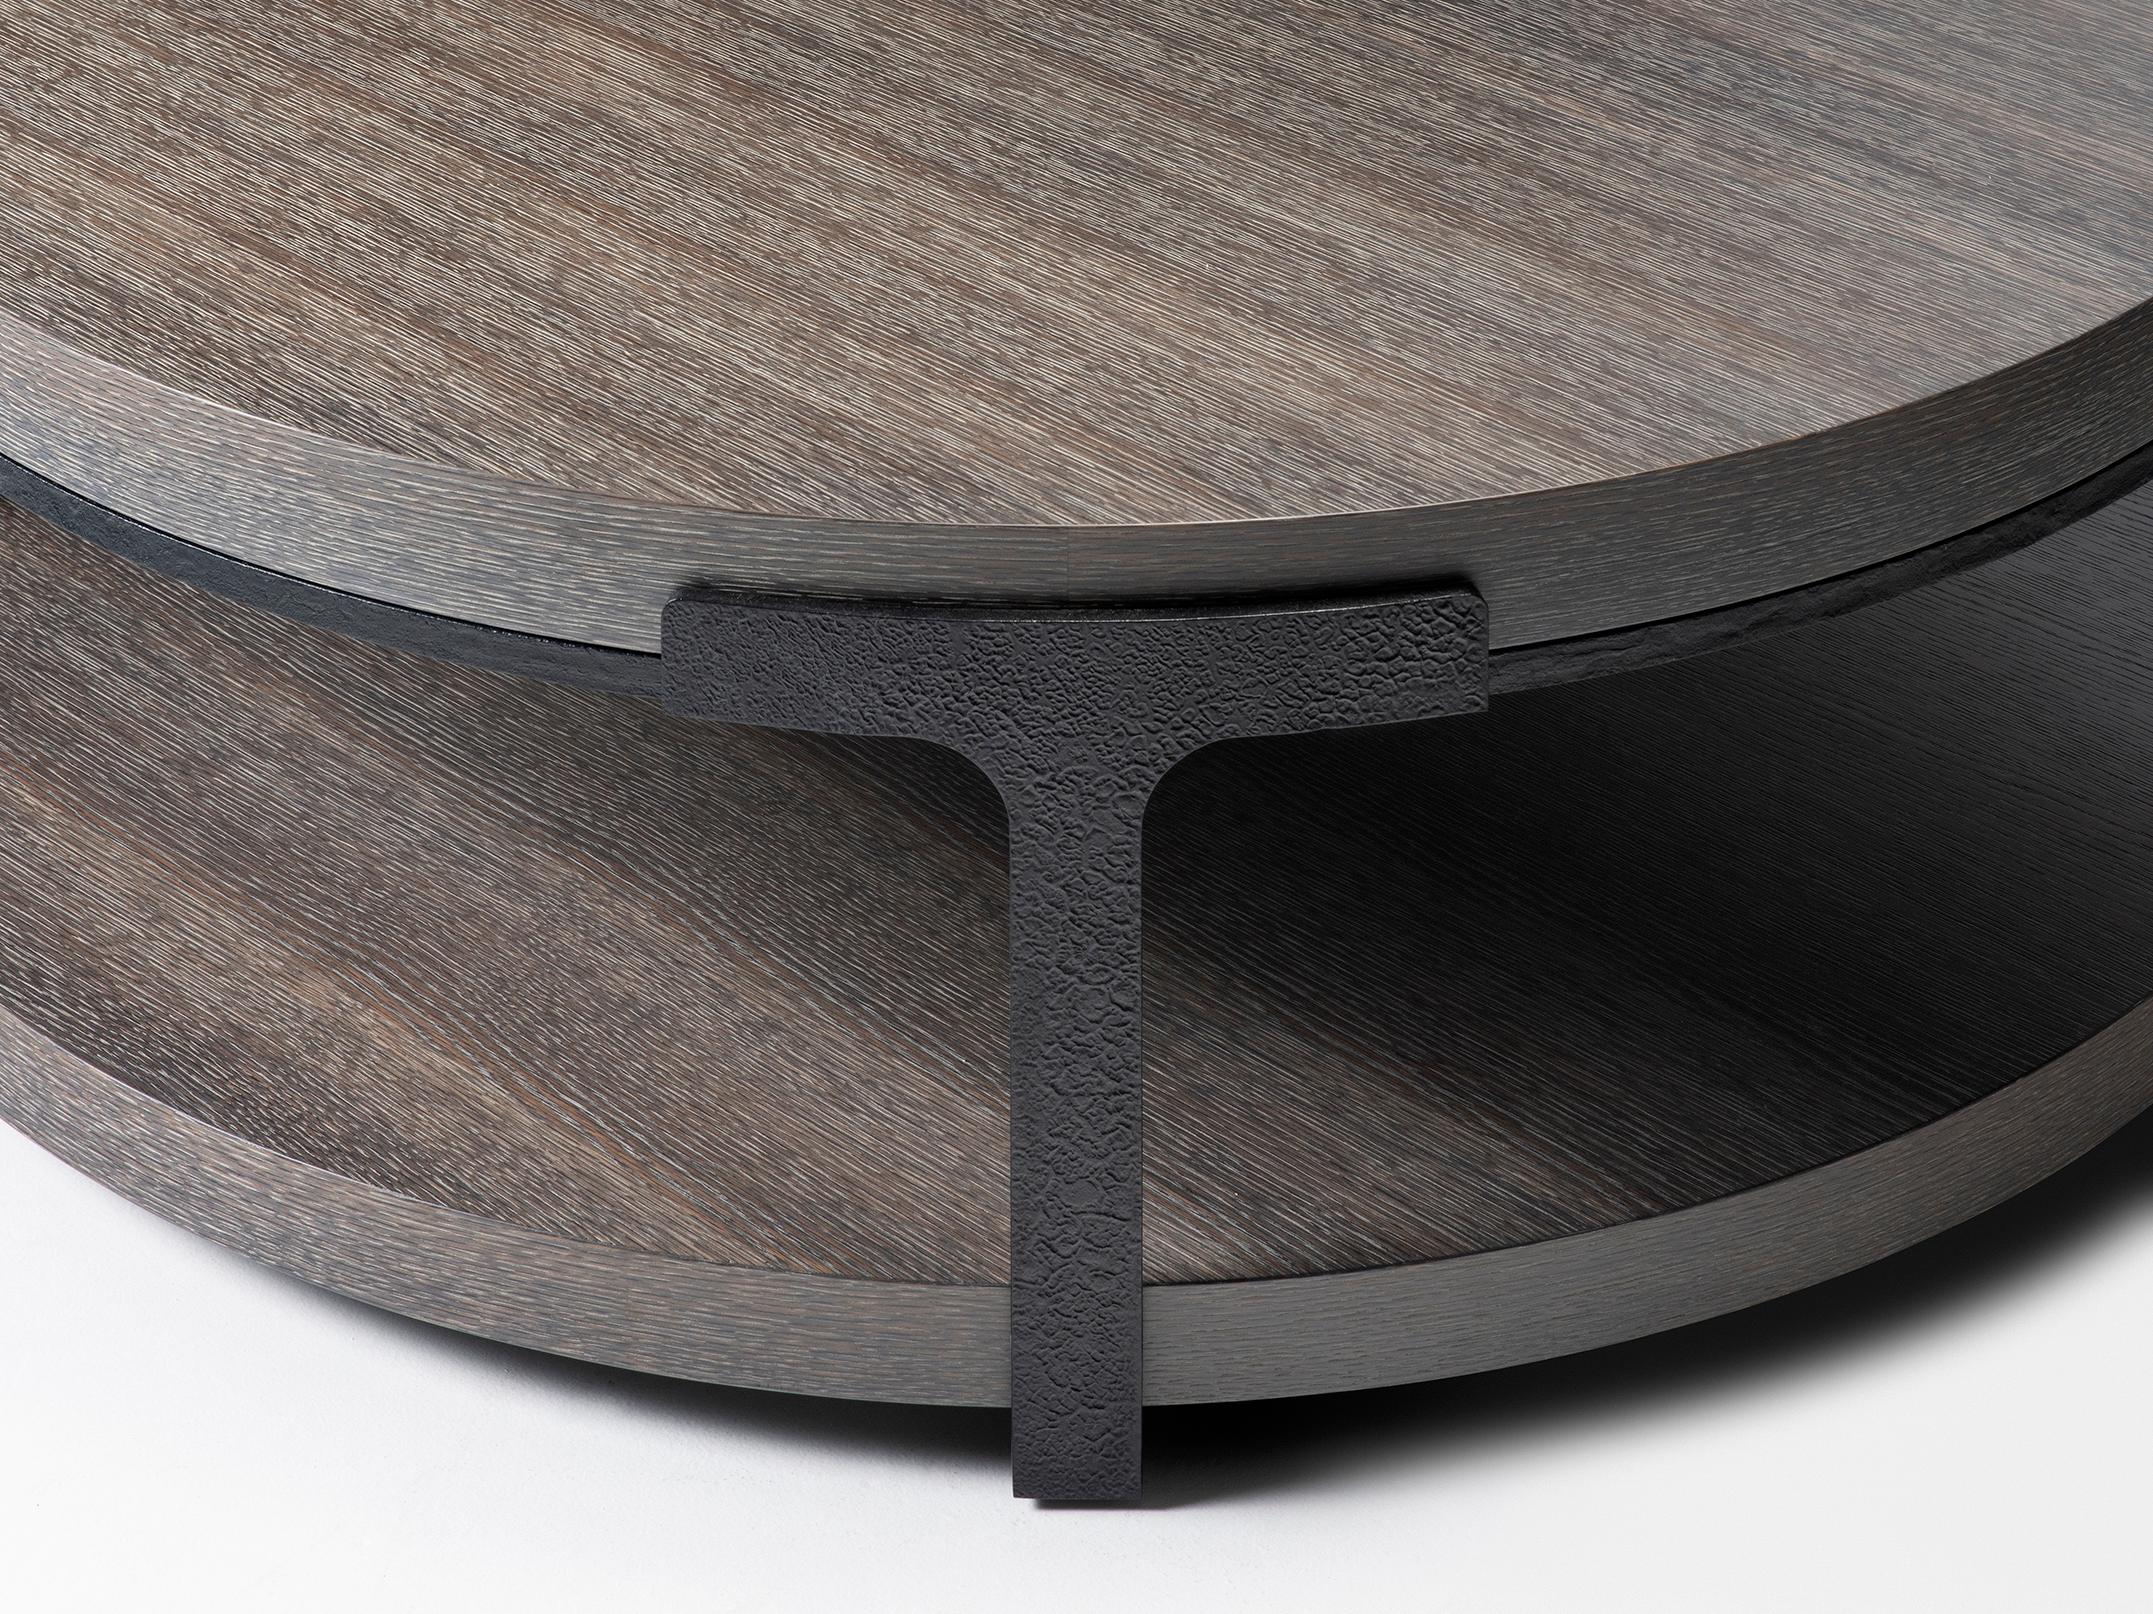 HOLLY HUNT Tudor round cocktail table with oak top and metal base. The Tudor Series is truly iconic to the HOLLY HUNT collection. Featuring hand forged iron with just the right texture to elicit interest, while still remaining clean and elegant with